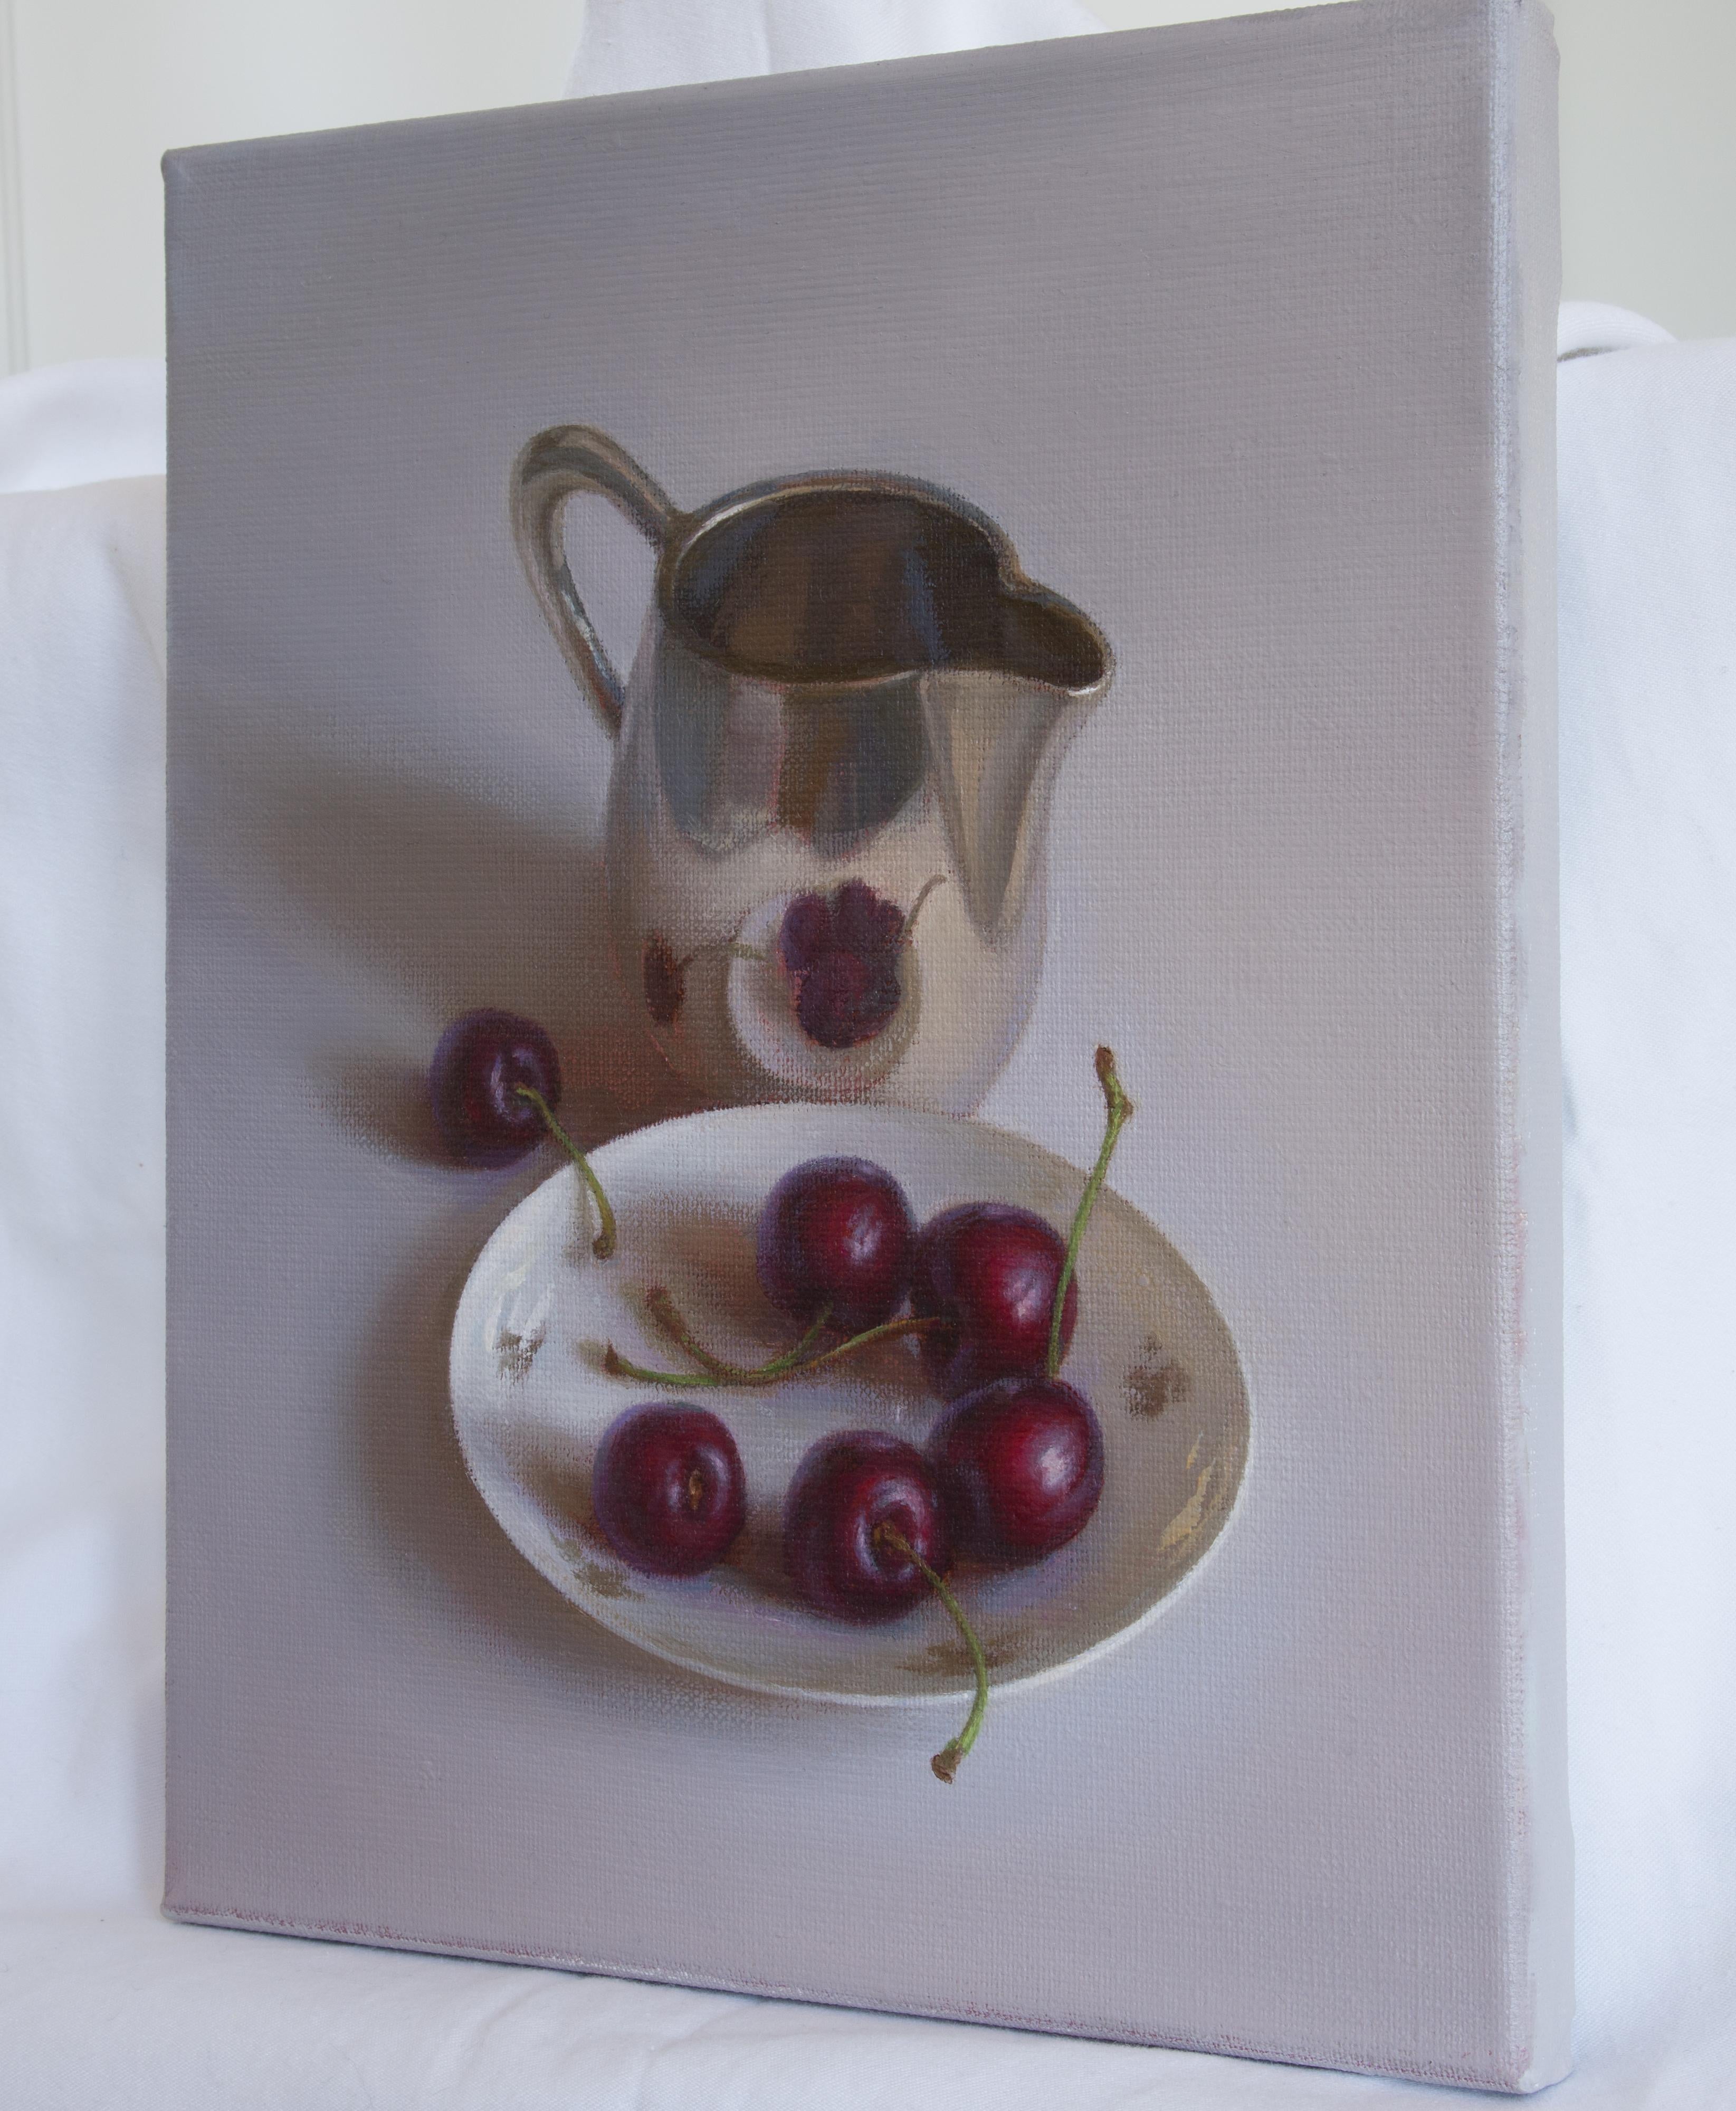 I love the way the silver and porcelain objects are reflected and the subtle warm and cool color throughout. The medium used is oil on canvas, which allows to capture the vibrant color, delicate texture, and the play of light on the subject matter.